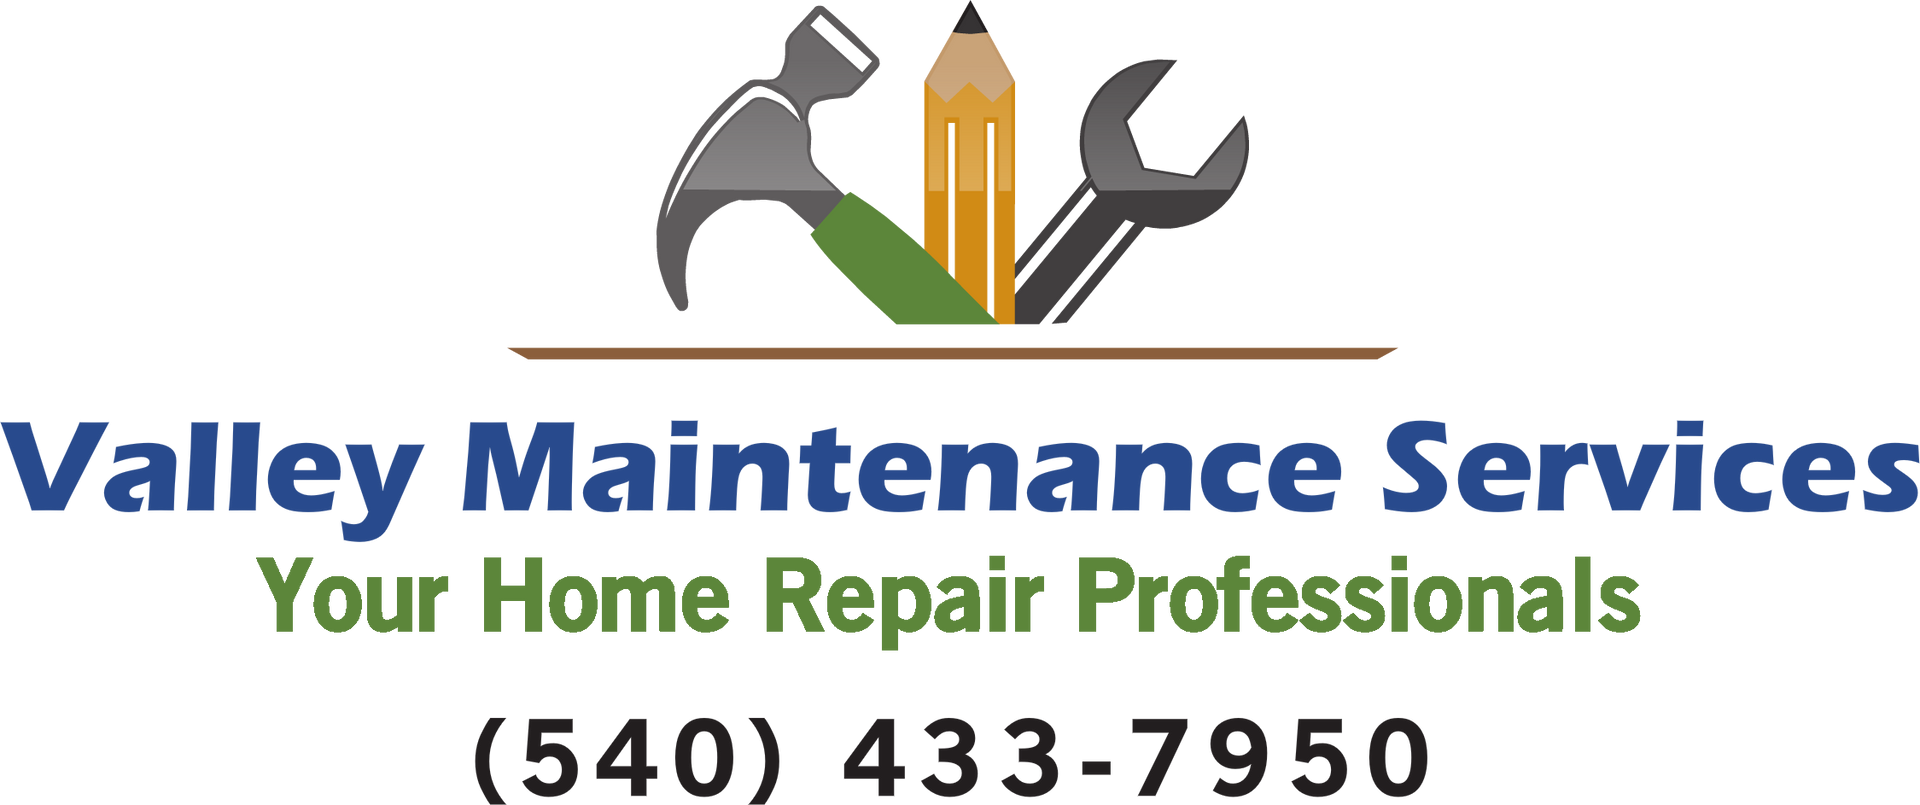 The logo for valley maintenance services your home repair professionals